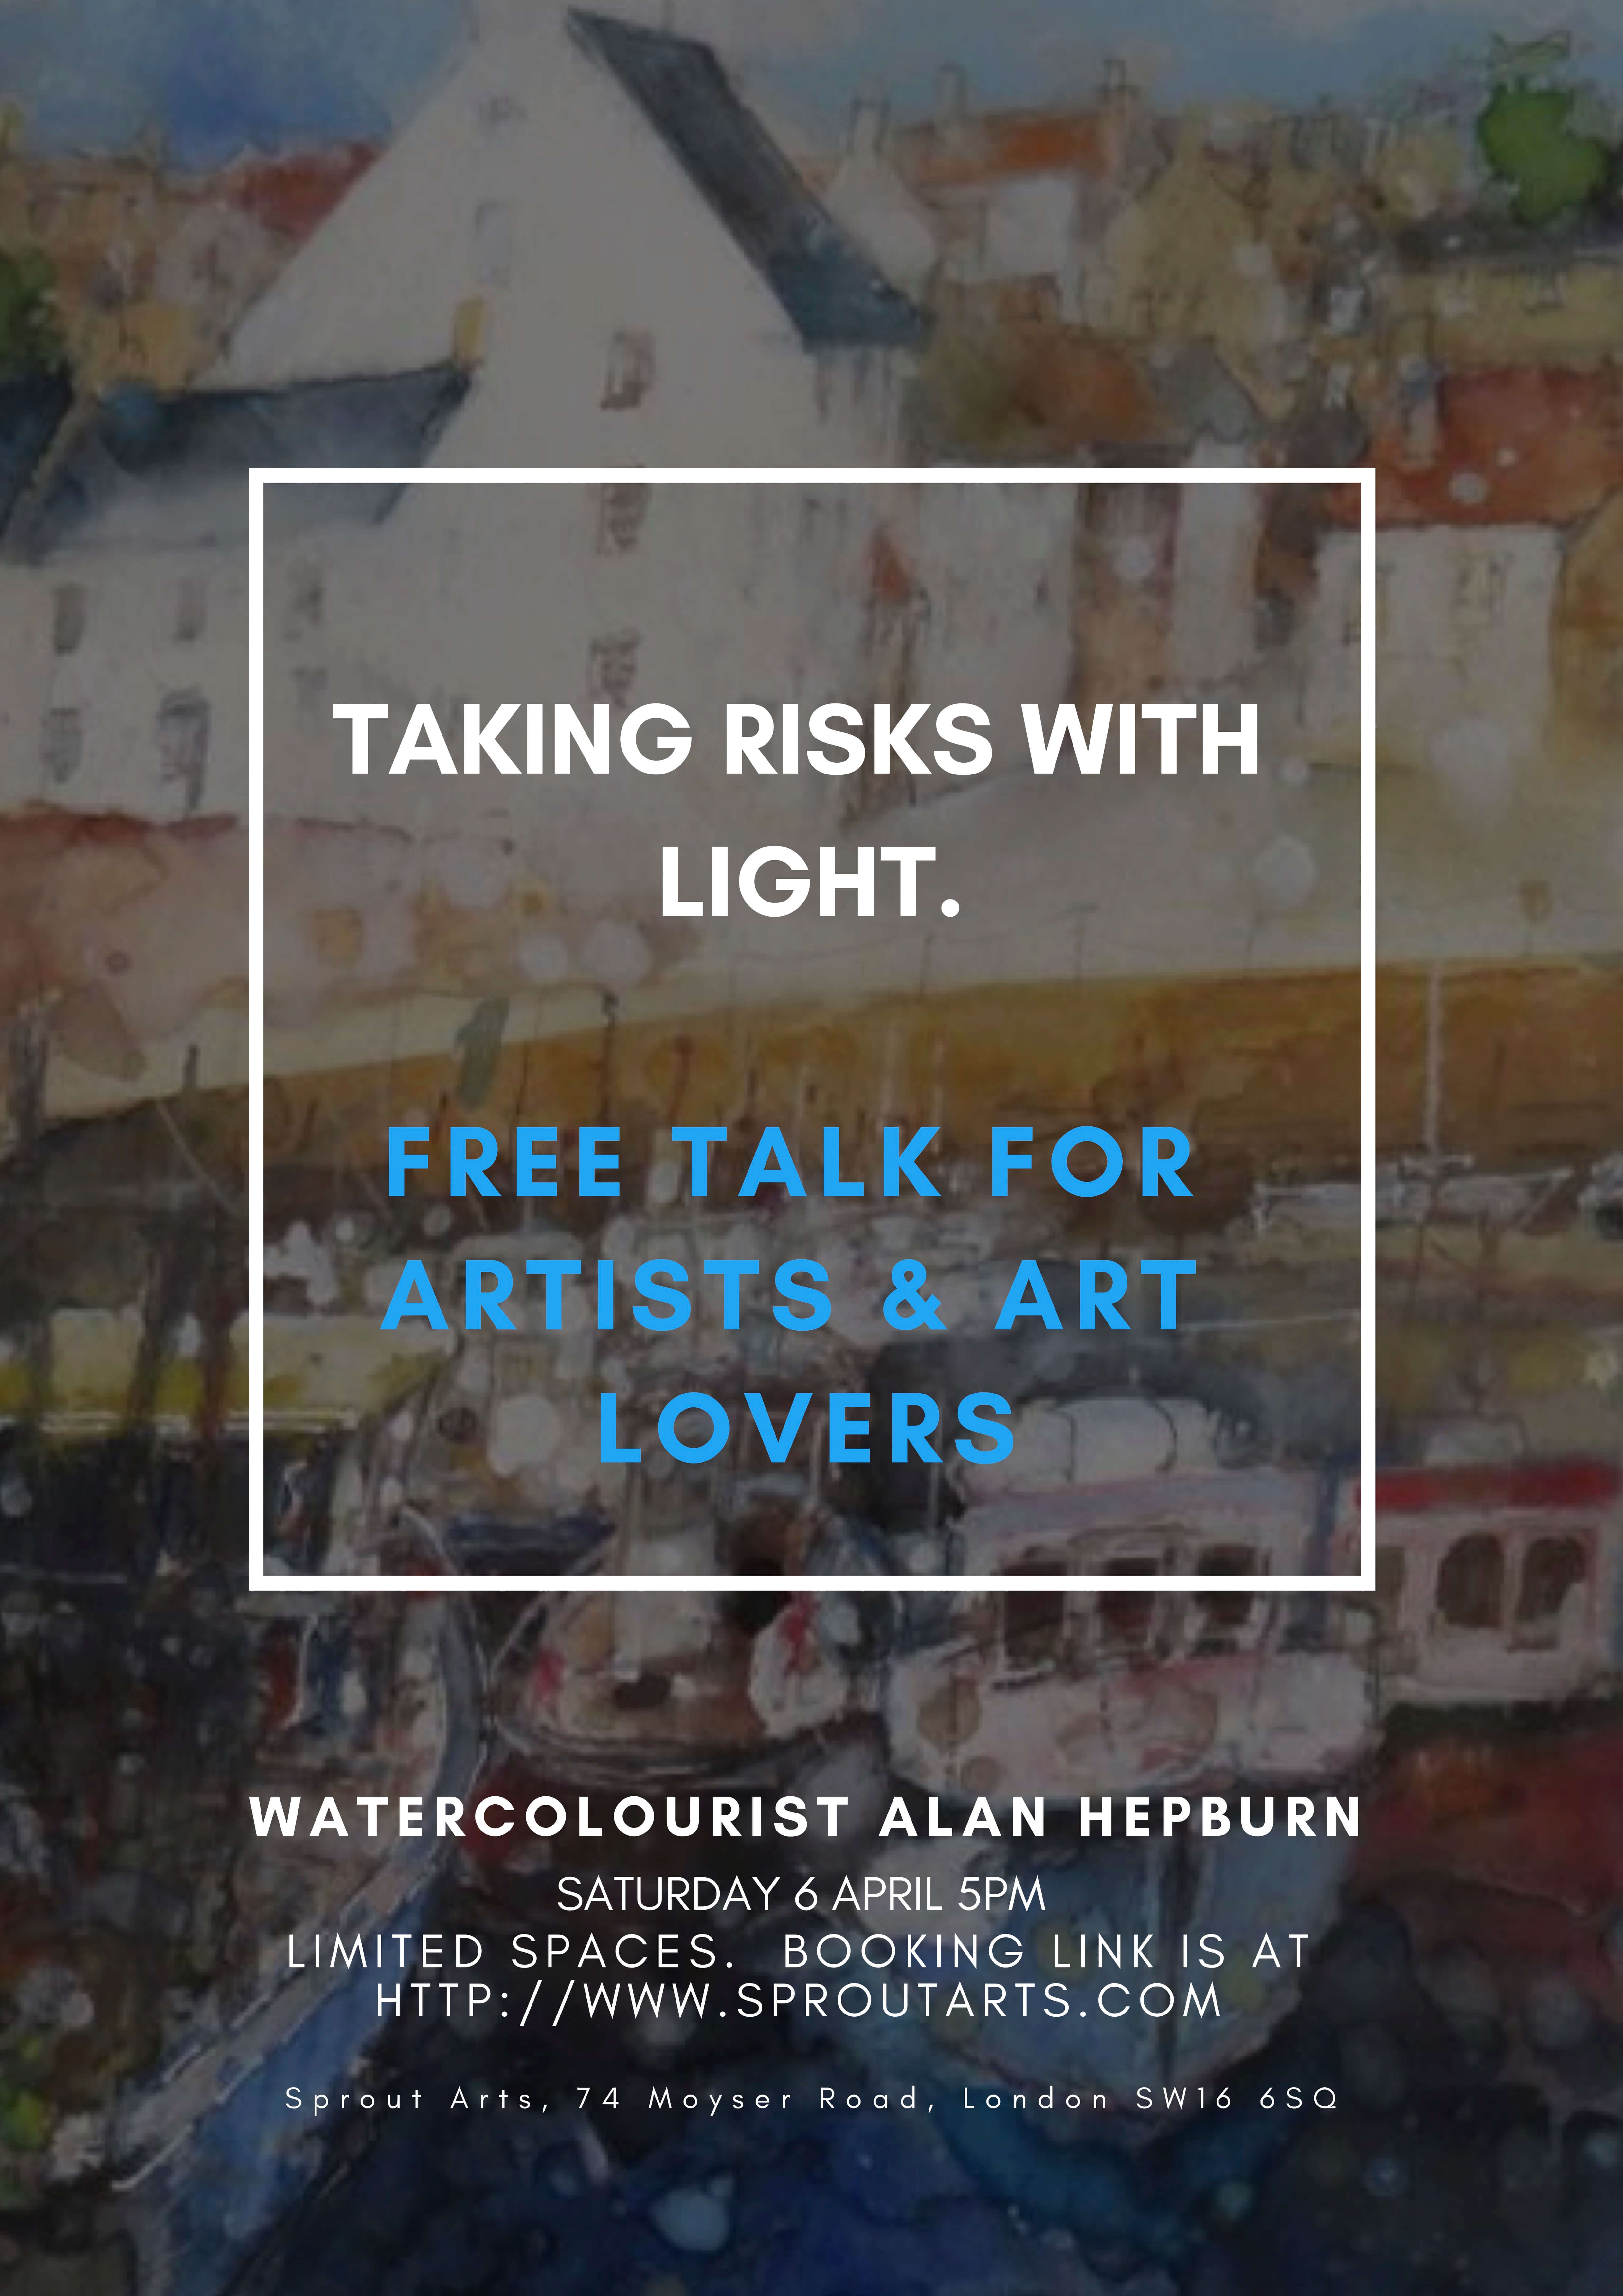 TAKING RISKS WITH LIGHT FREE TALK FOR ARTISTS 3